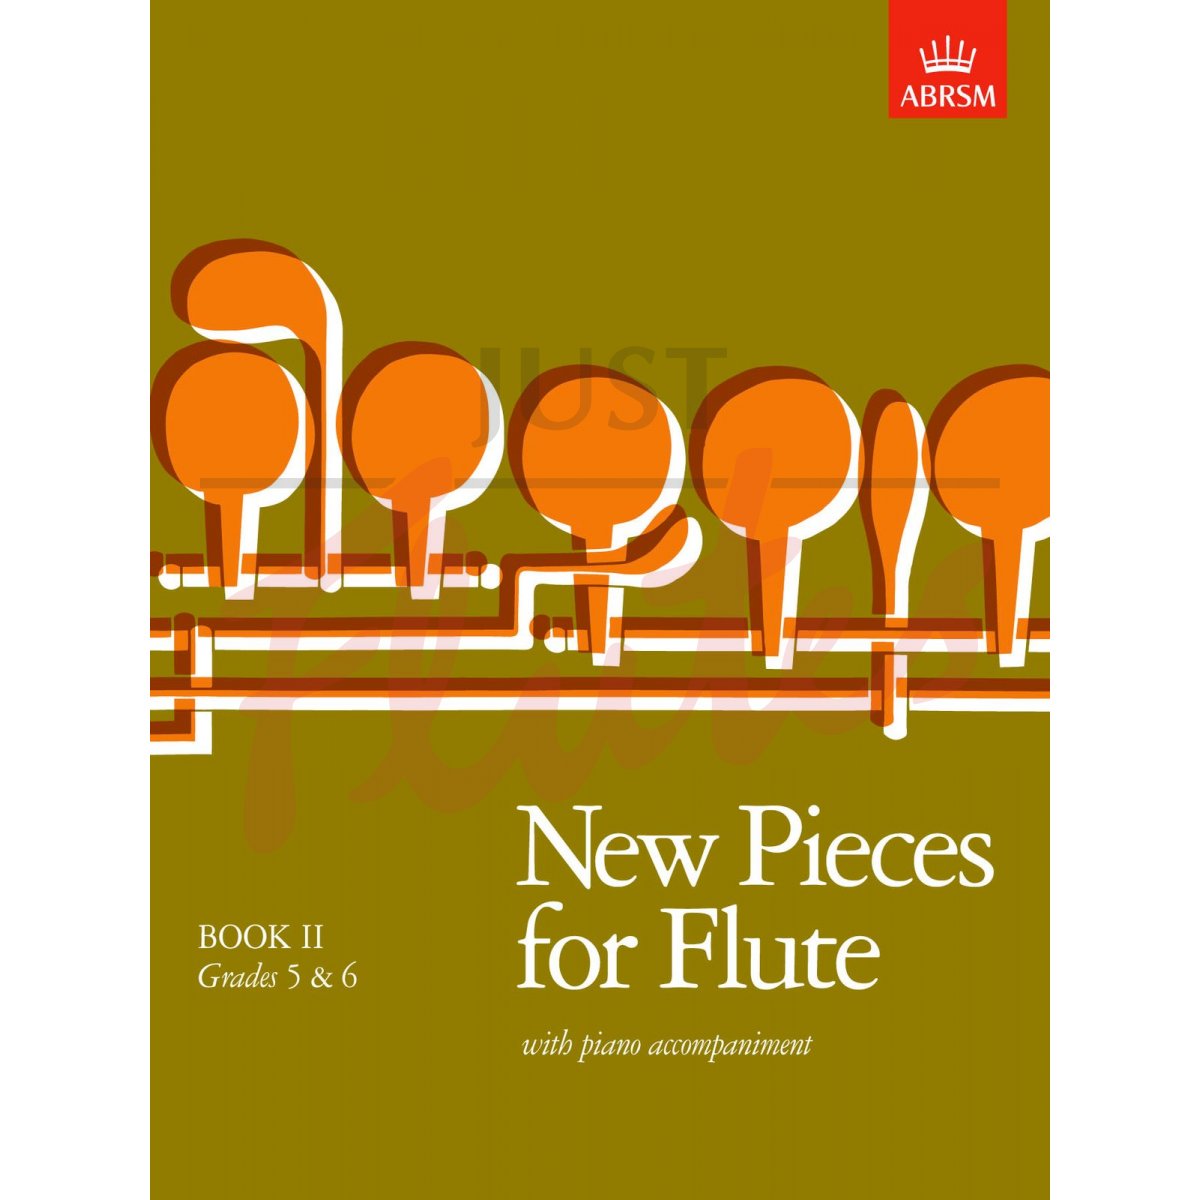 New Pieces for Flute with Piano Accompaniment, Book 2